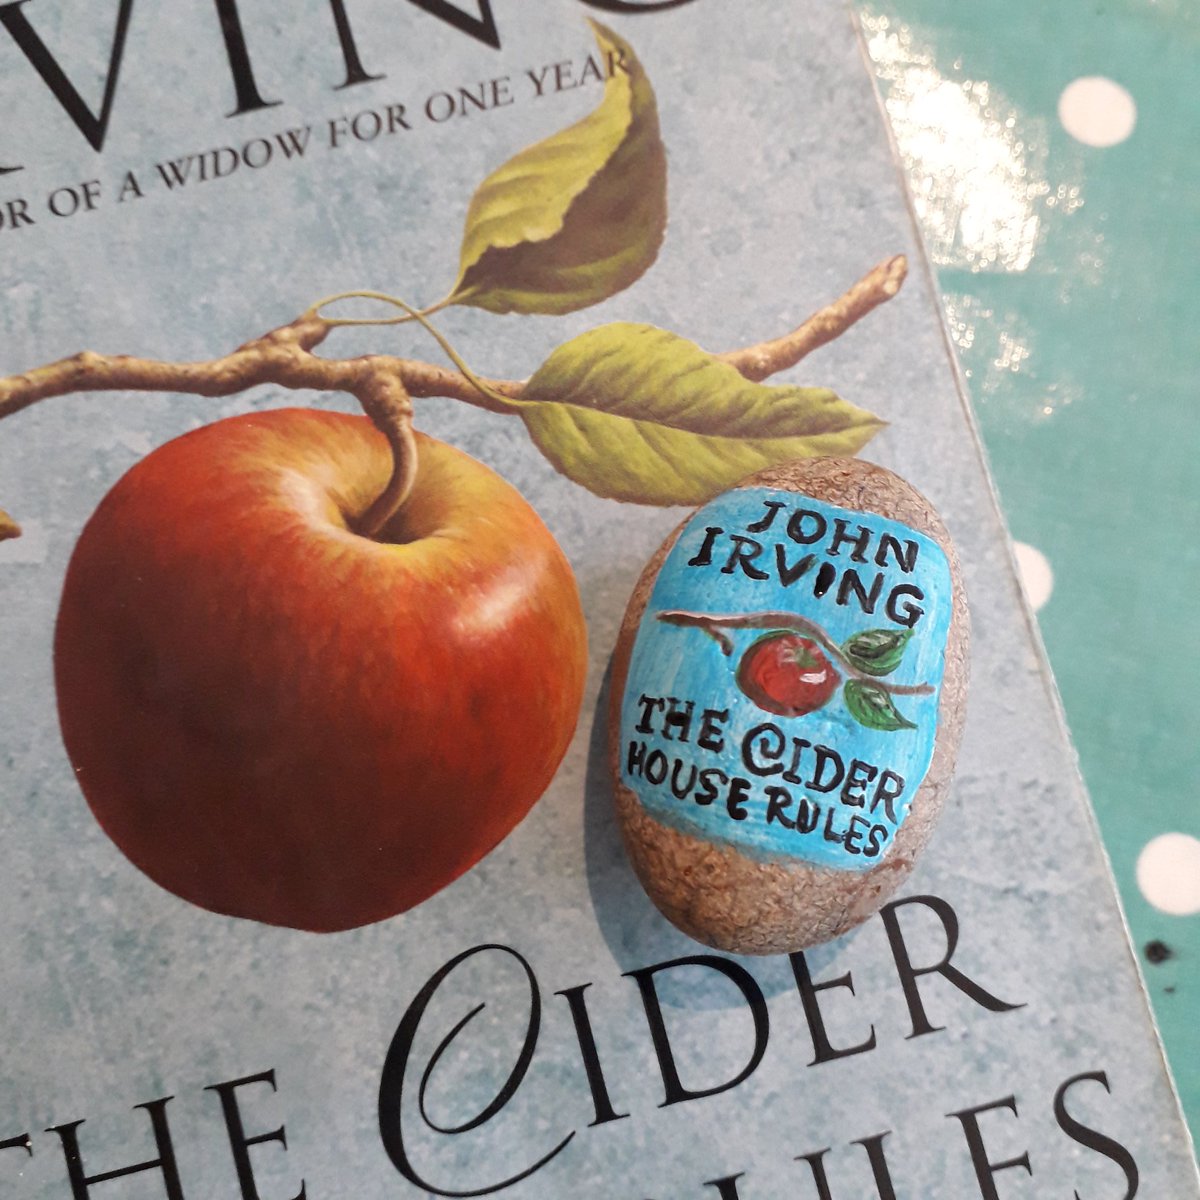 These are getting smaller and smaller... The Cider House Rules by John Irving, on a pebble.